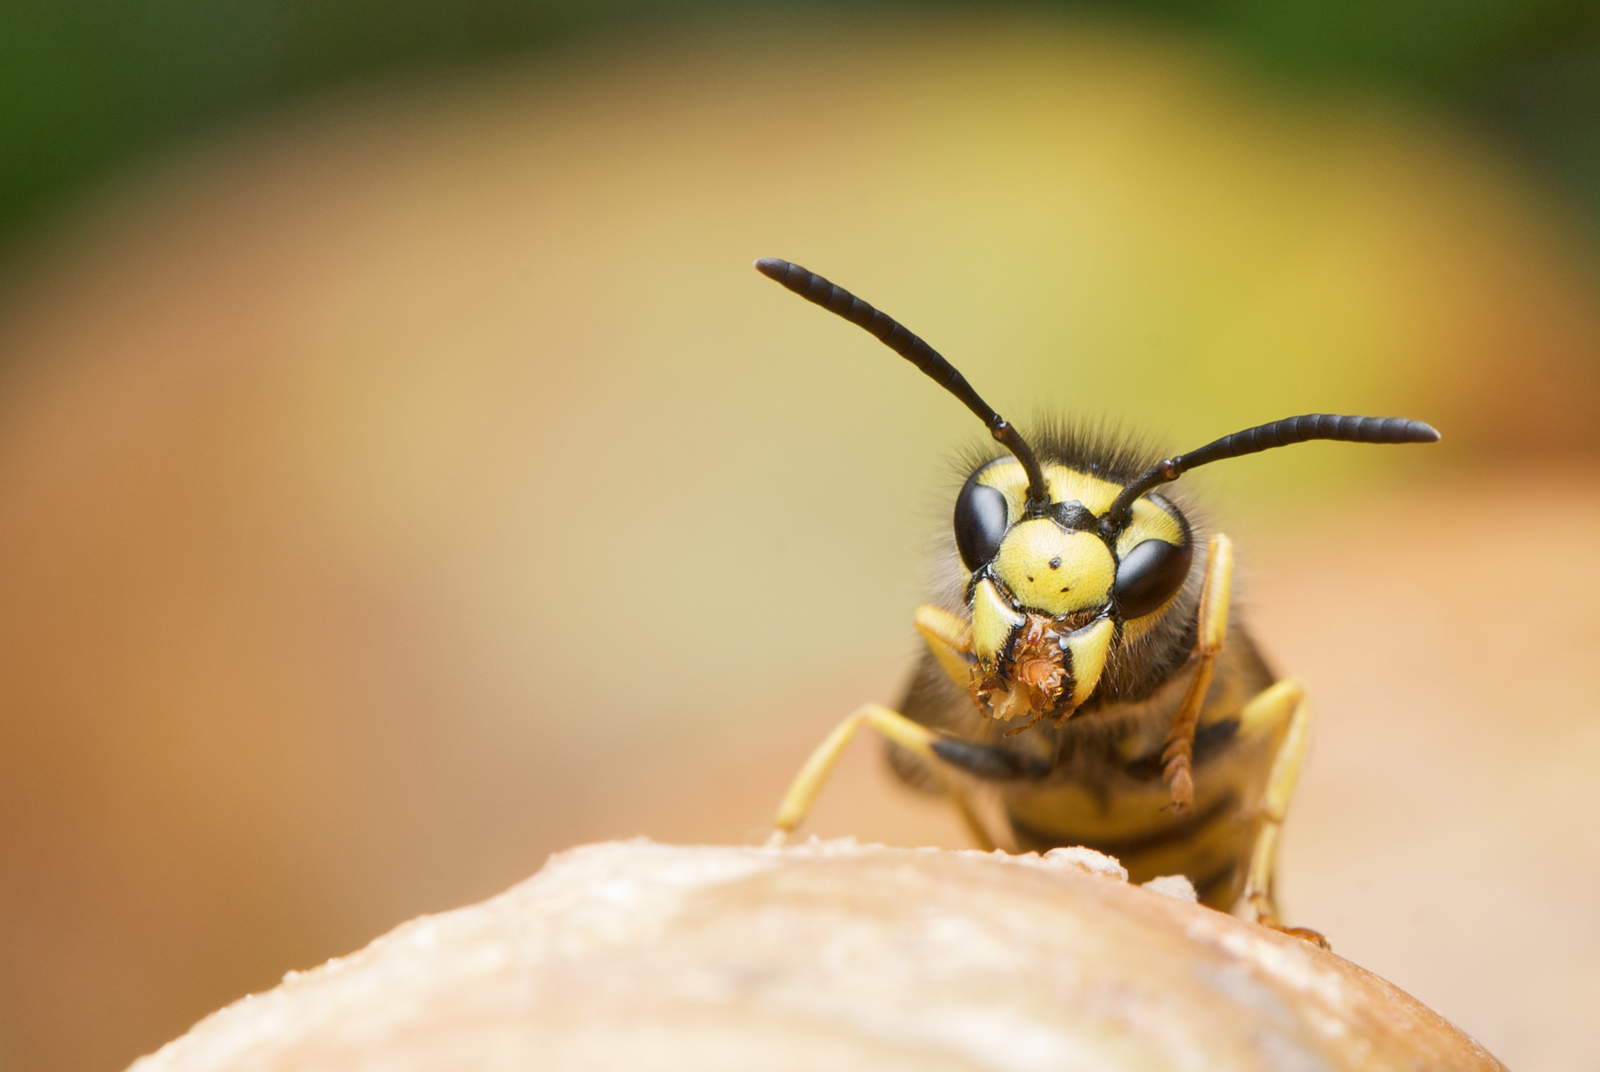 A wasp standing on a plant